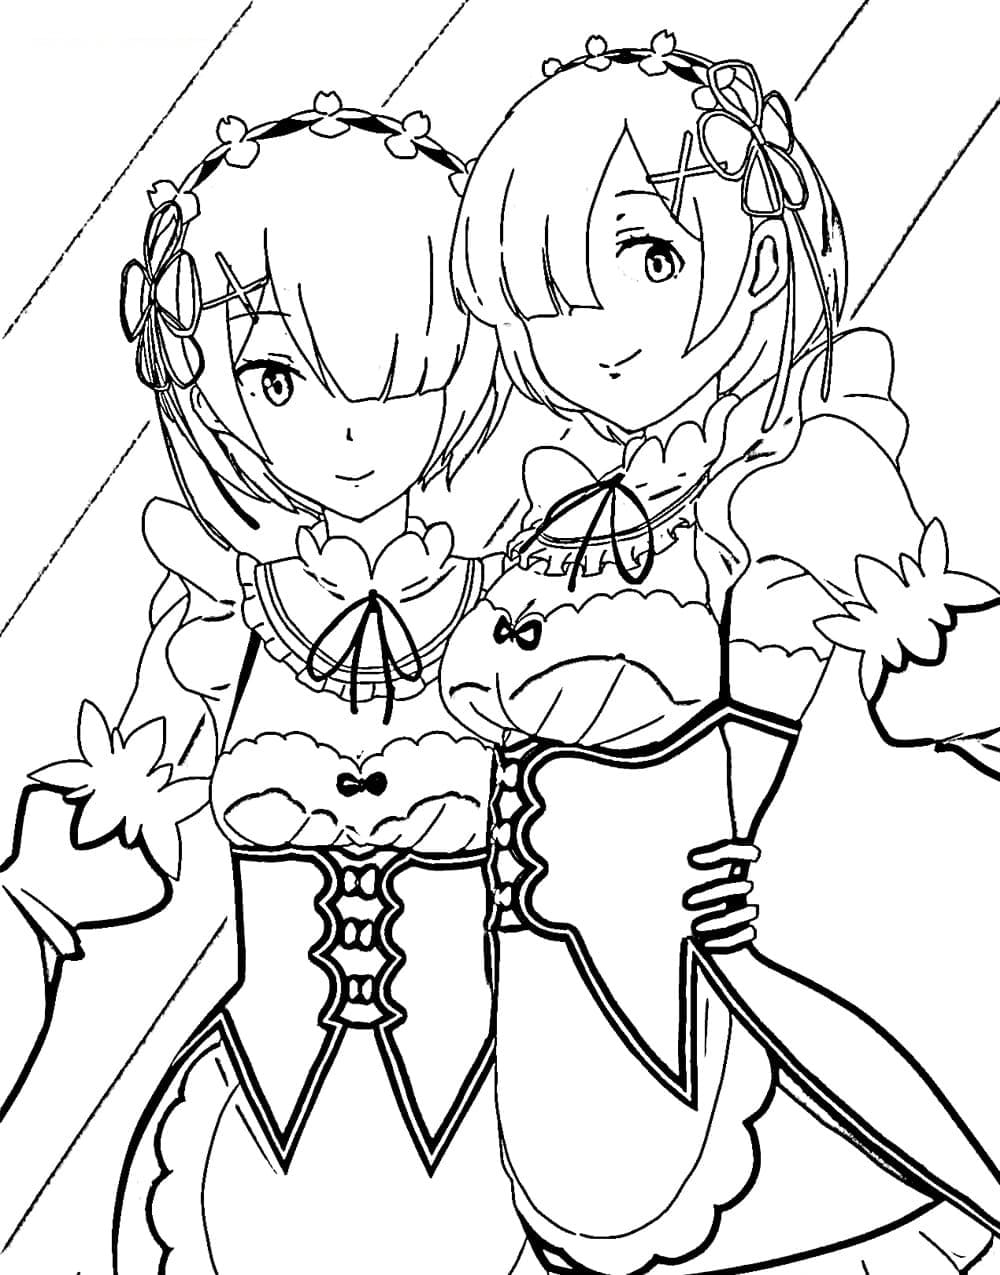 Printable Re: Zero Coloring Pages